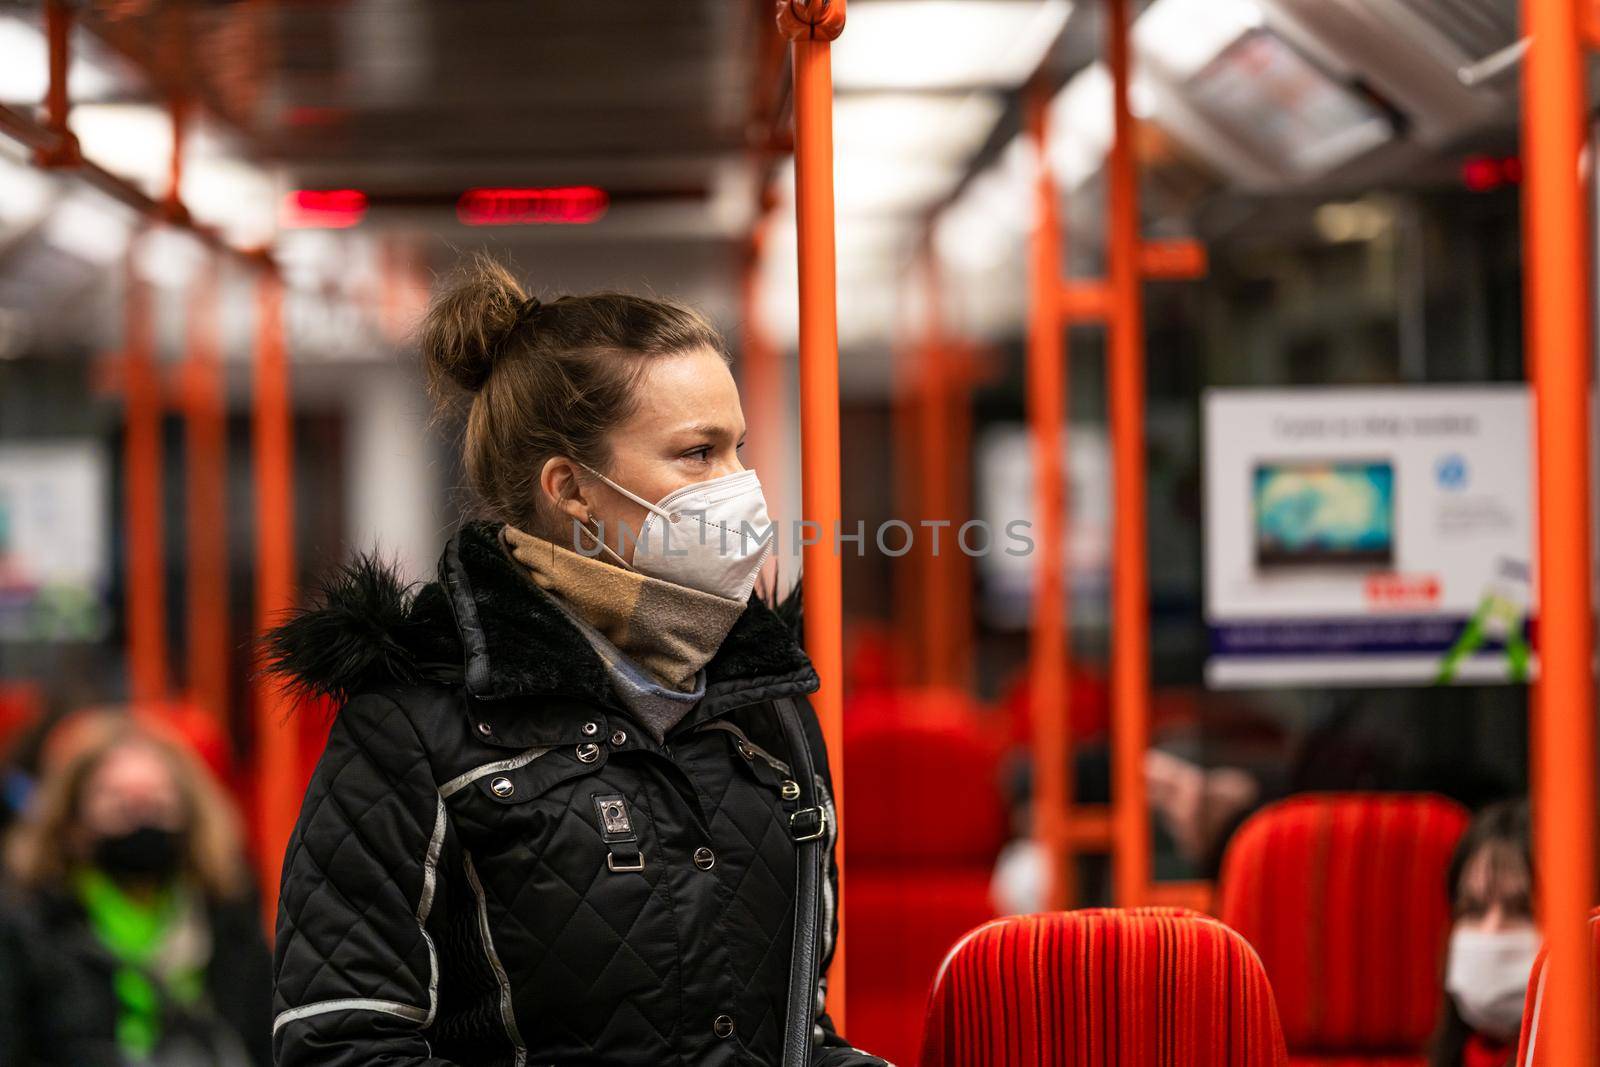 The woman travels by public transport around the city by Edophoto